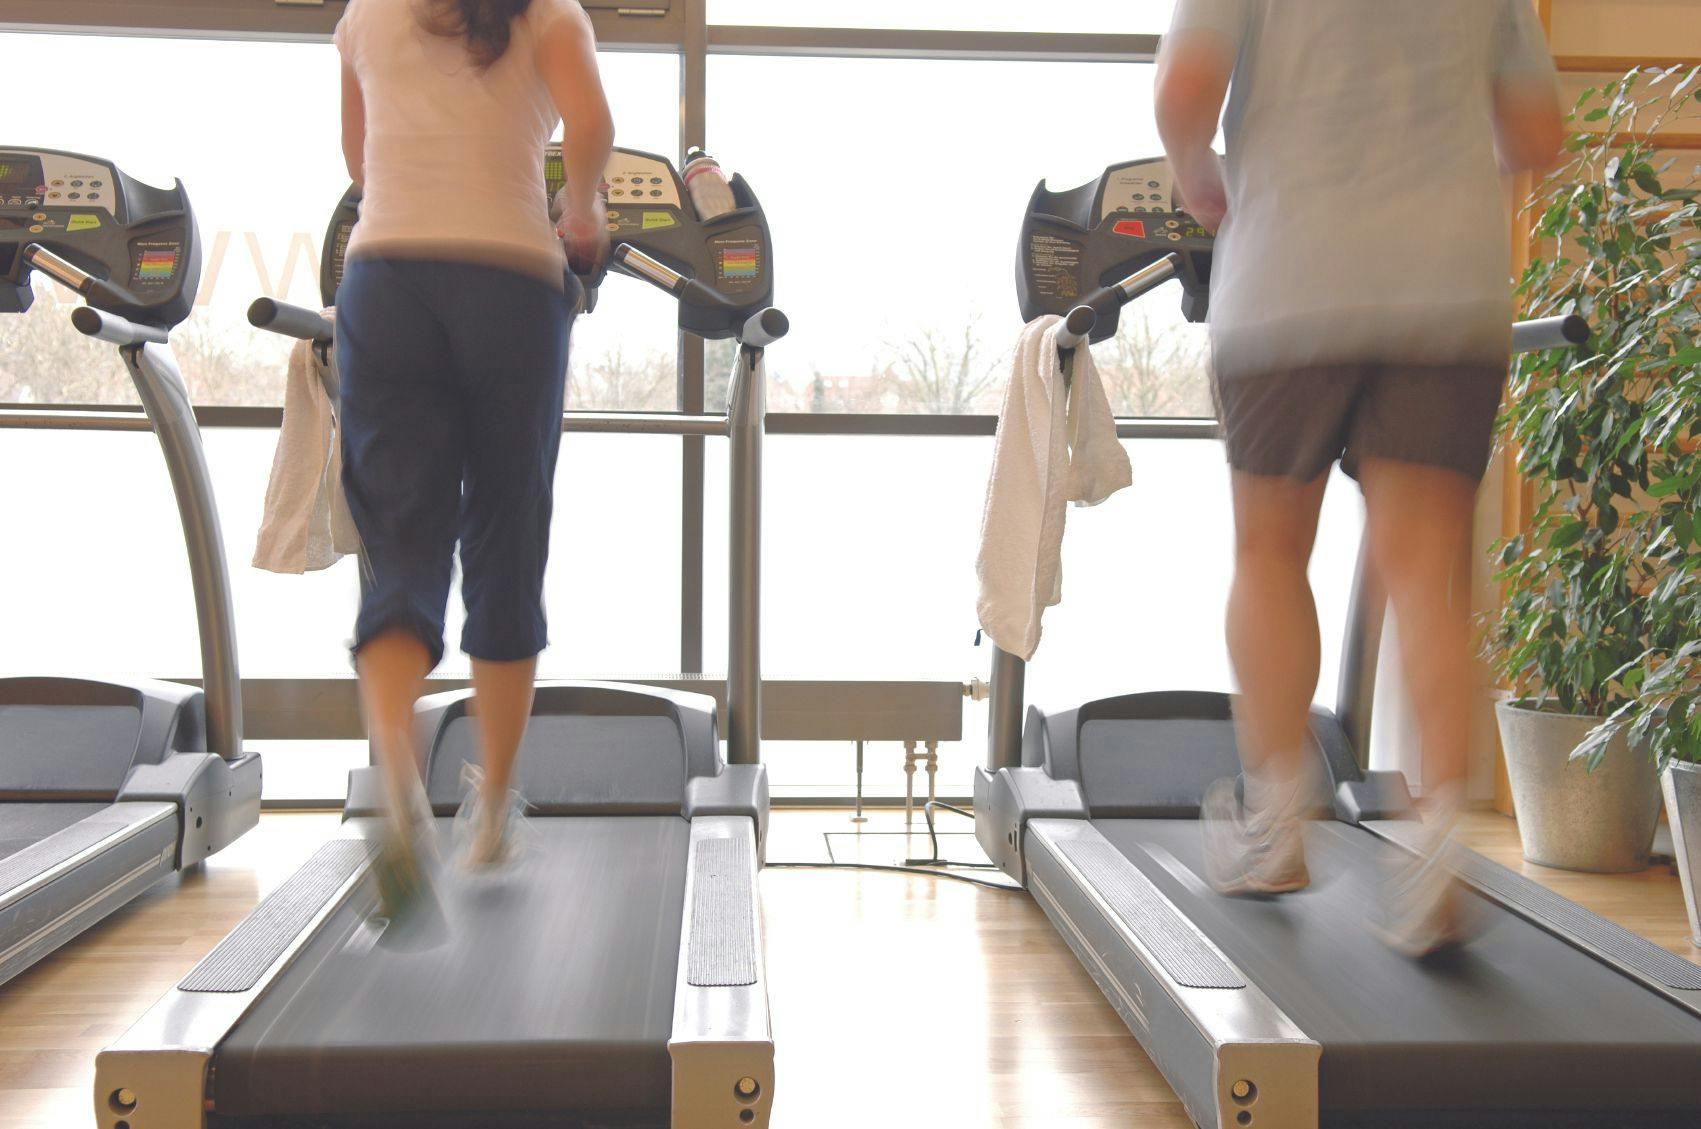 Two side-by-side treadmills with people walking on them